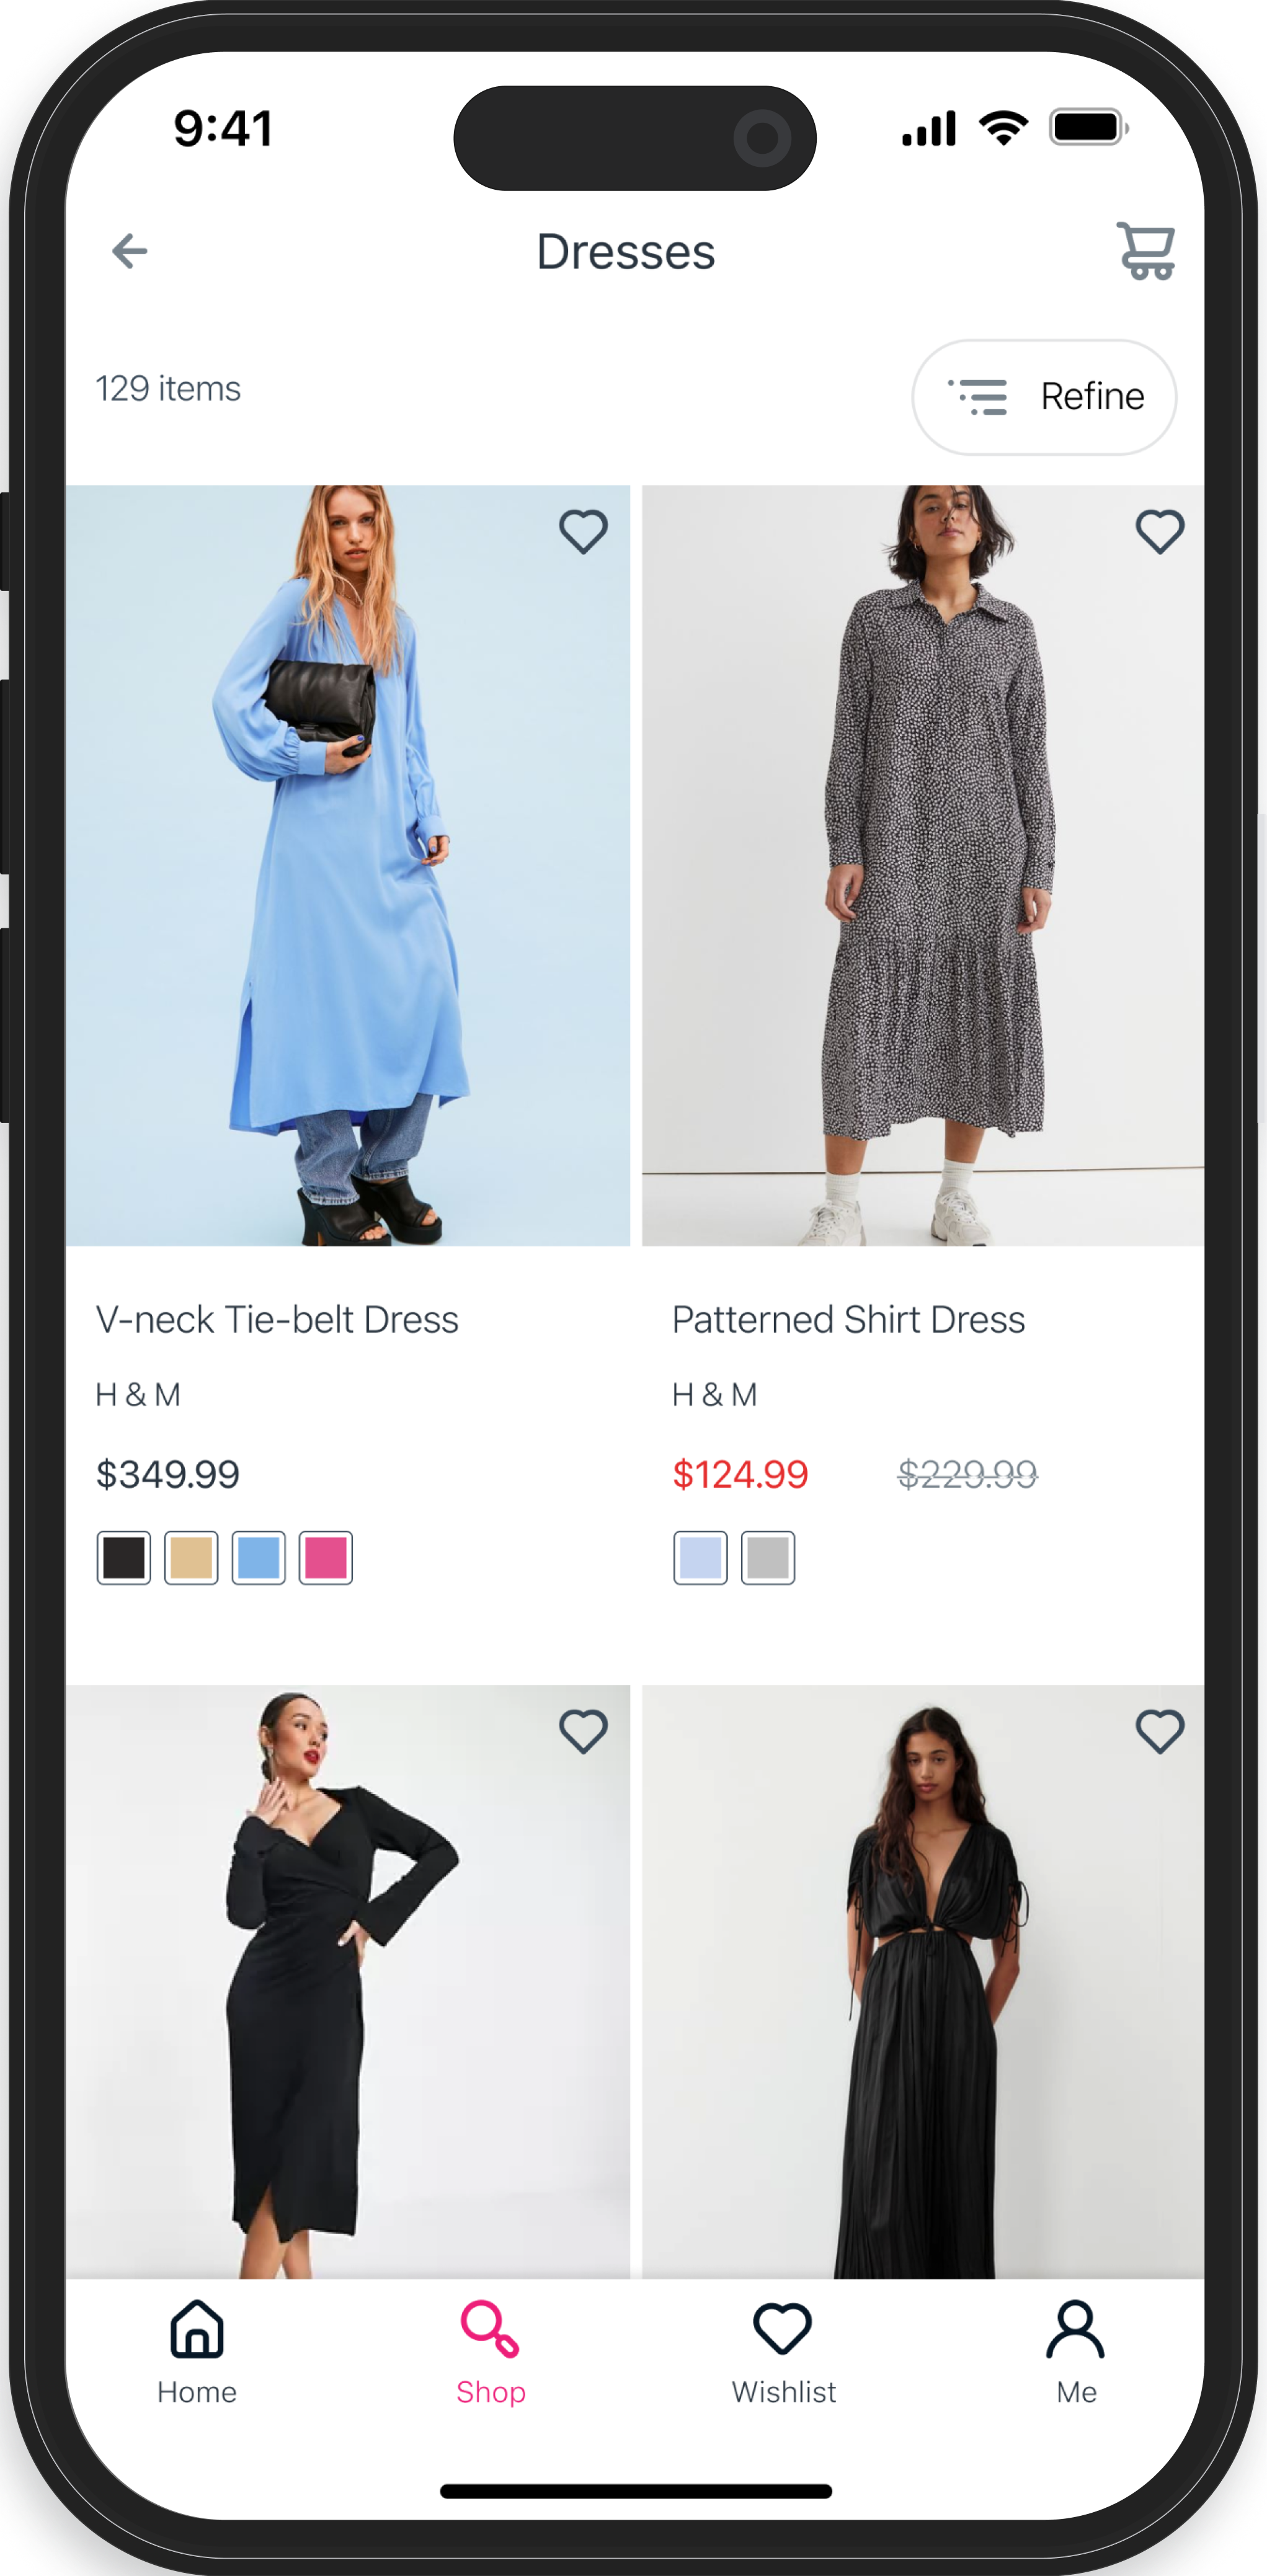 The image displays a mobile phone interface from an online fashion retailer's dresses section. It features four dresses with their images, names, and prices; two are visible: a 'V-neck Tie-belt Dress' and a 'Patterned Shirt Dress', both from H&M, with color options below. The screen also includes a navigation bar with icons for home, shop, wishlist, and user profile at the bottom.